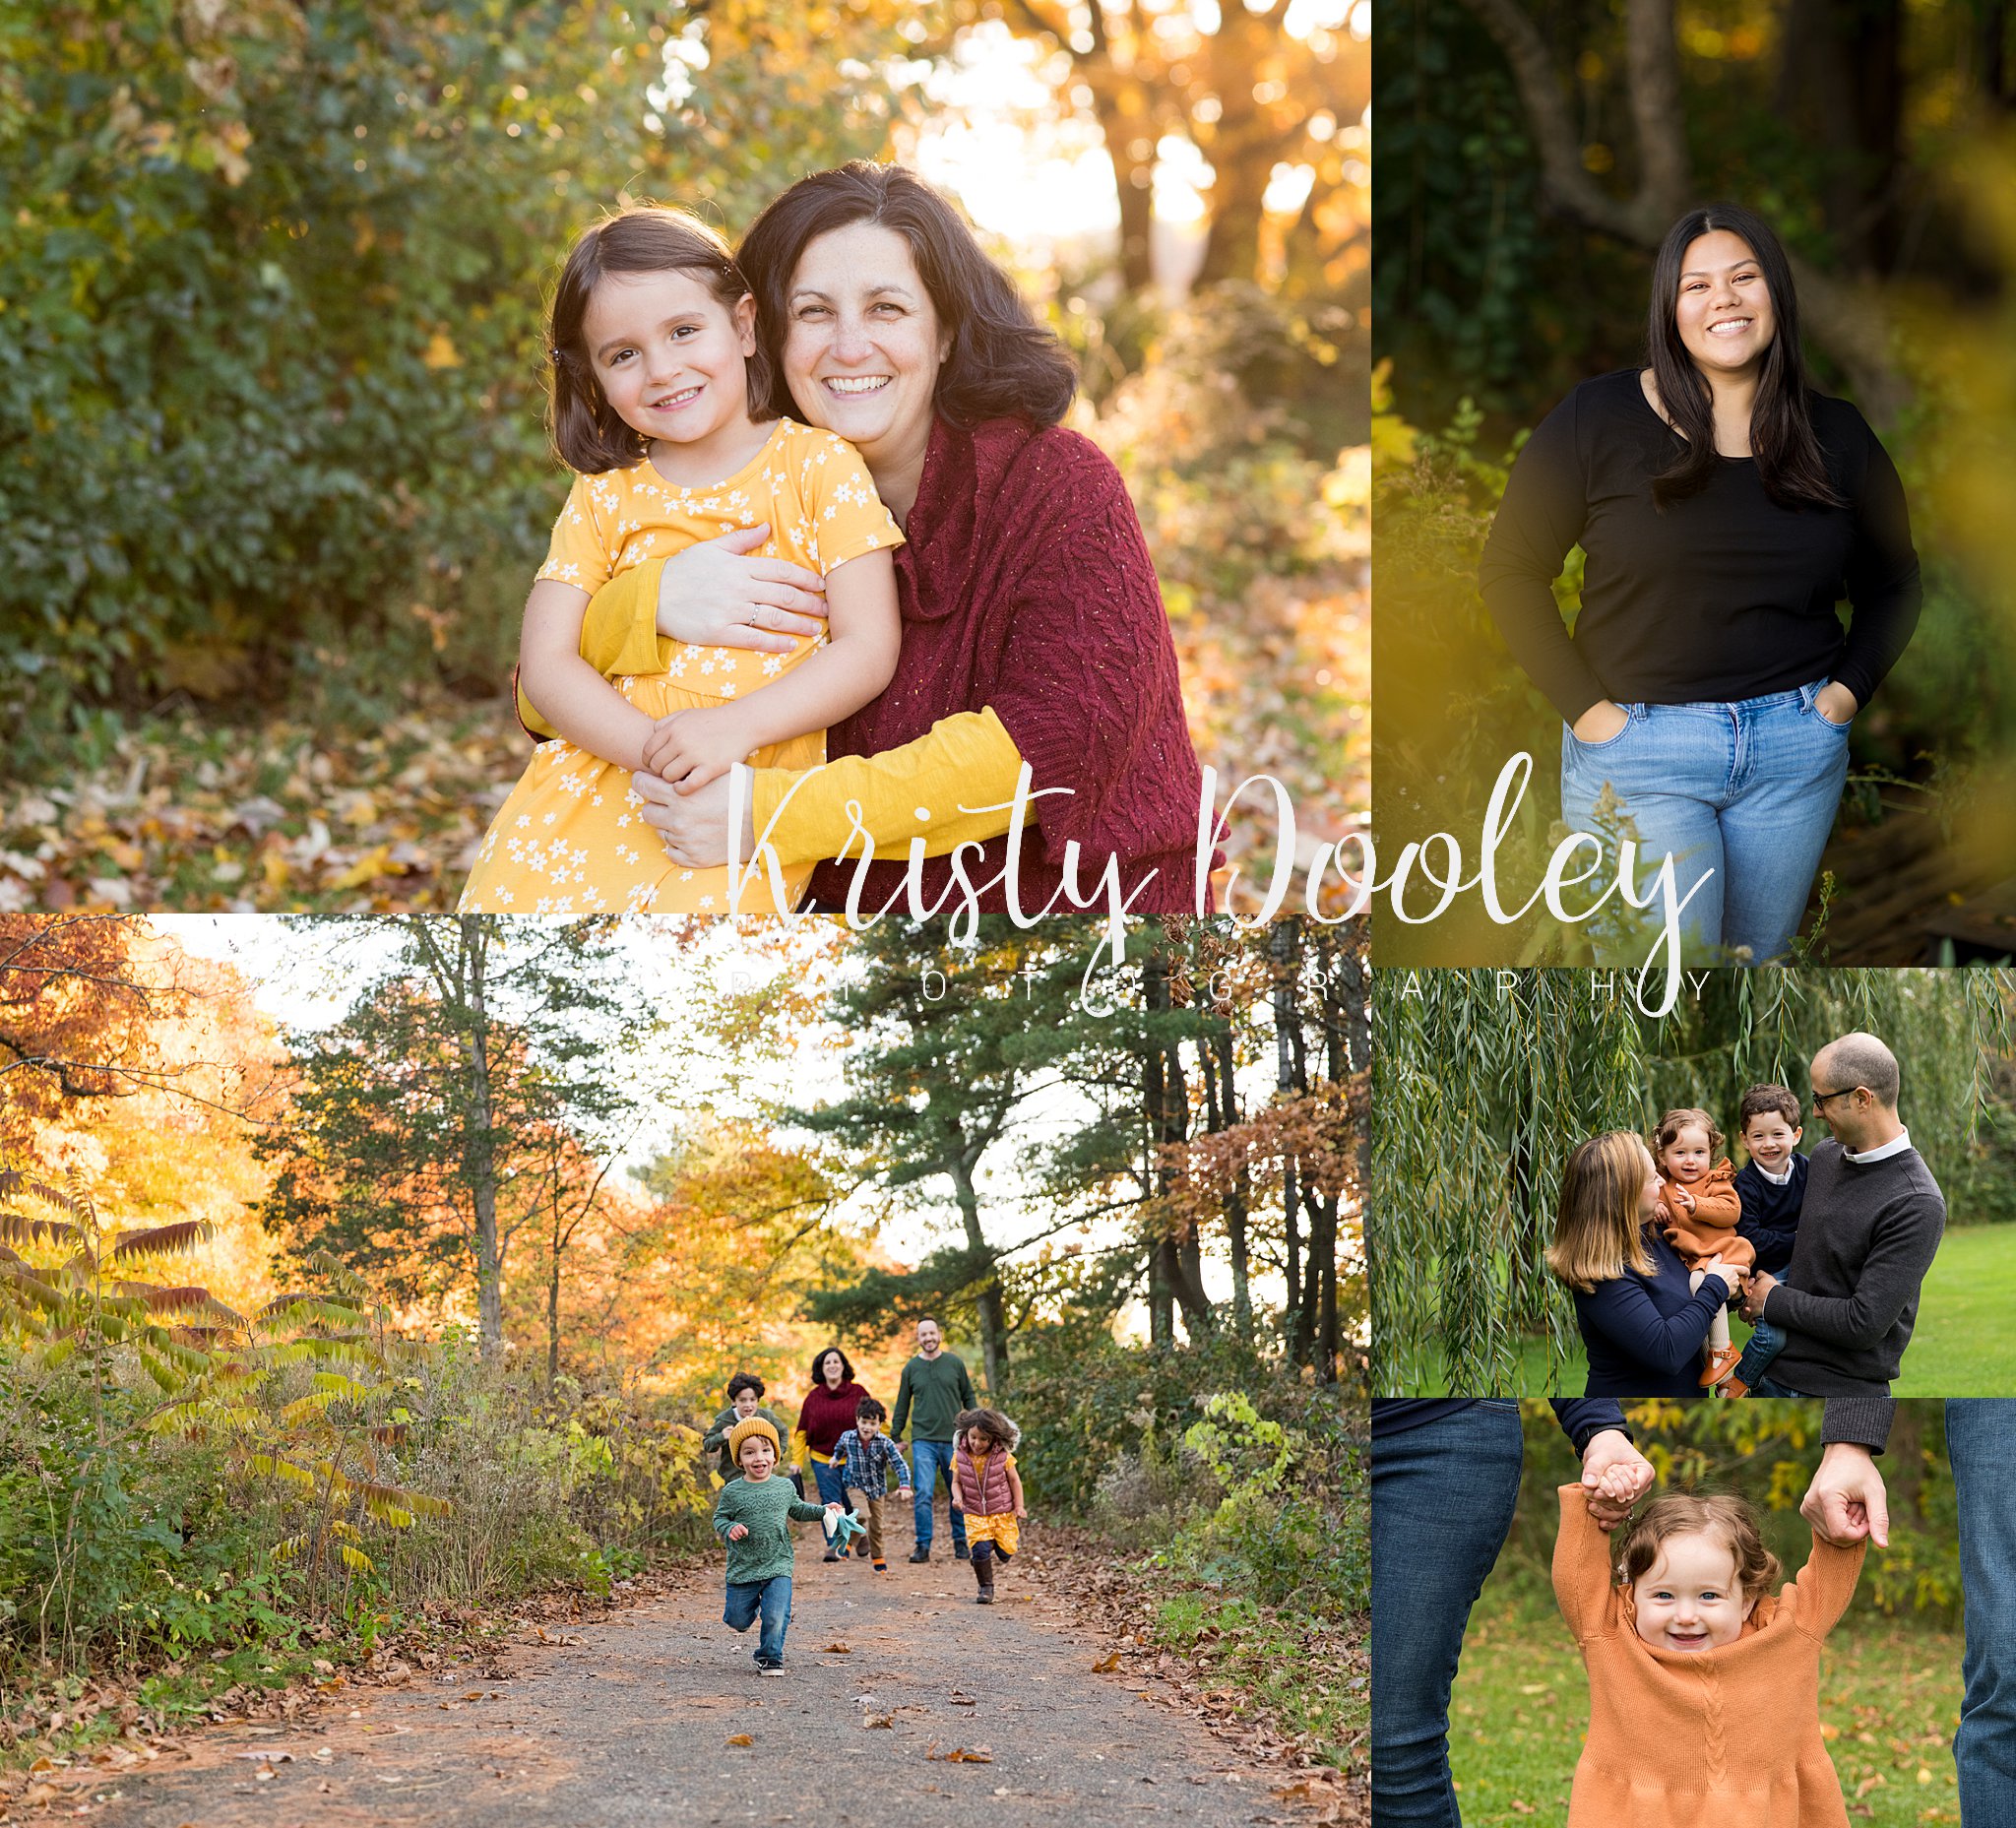 Kristy Dooley photography at Oakledge park